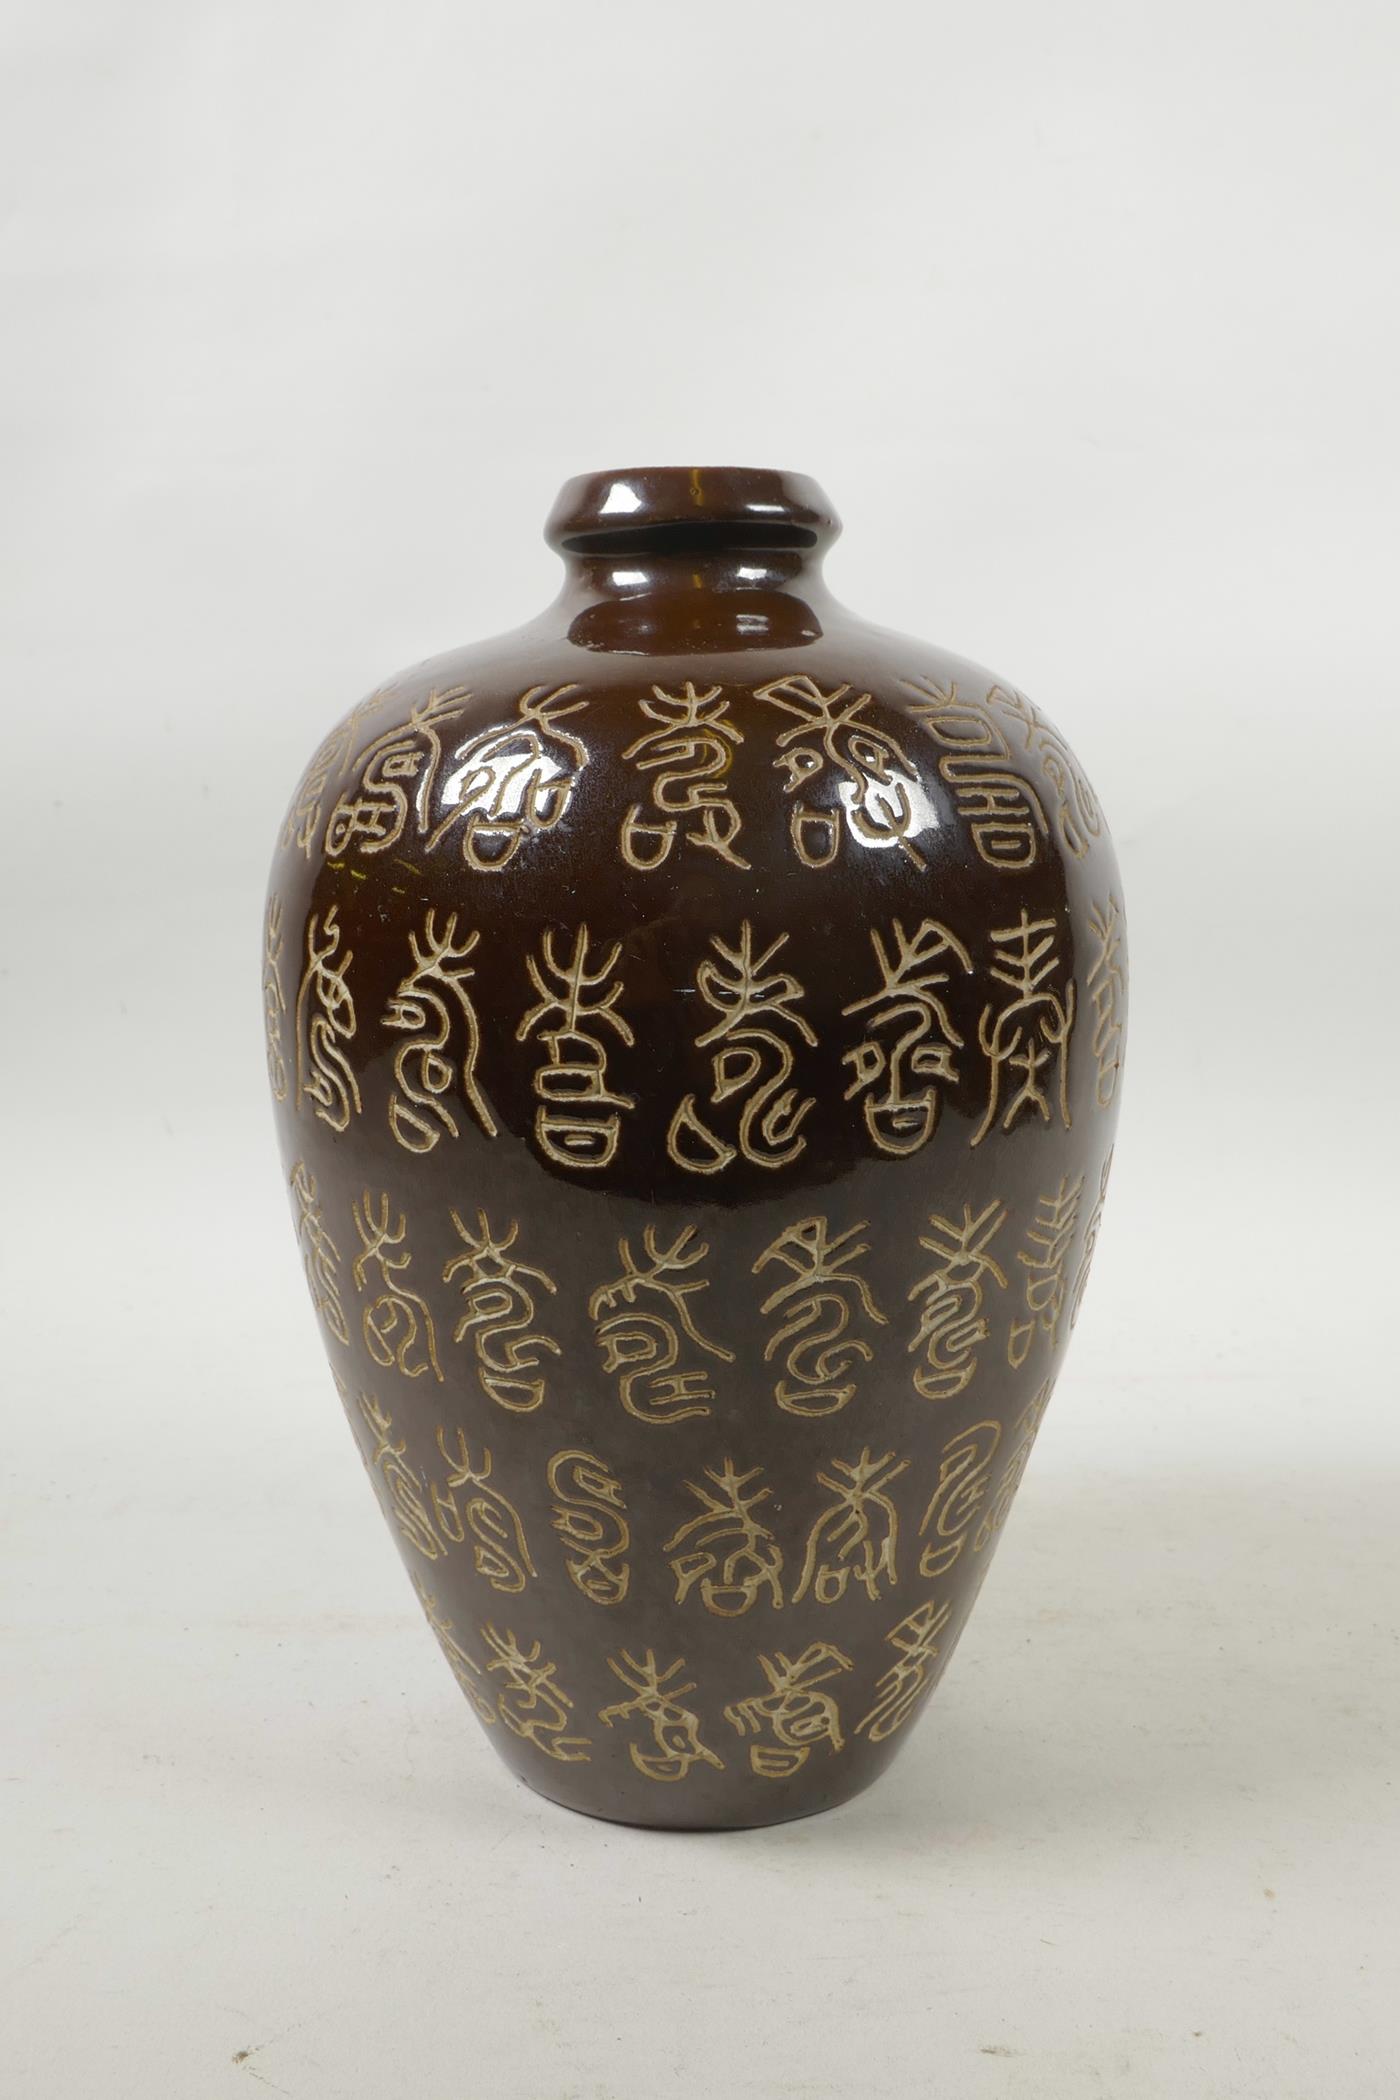 A Chinese treacle glazed porcelain vase with all over chased inscription decoration, 8½" high